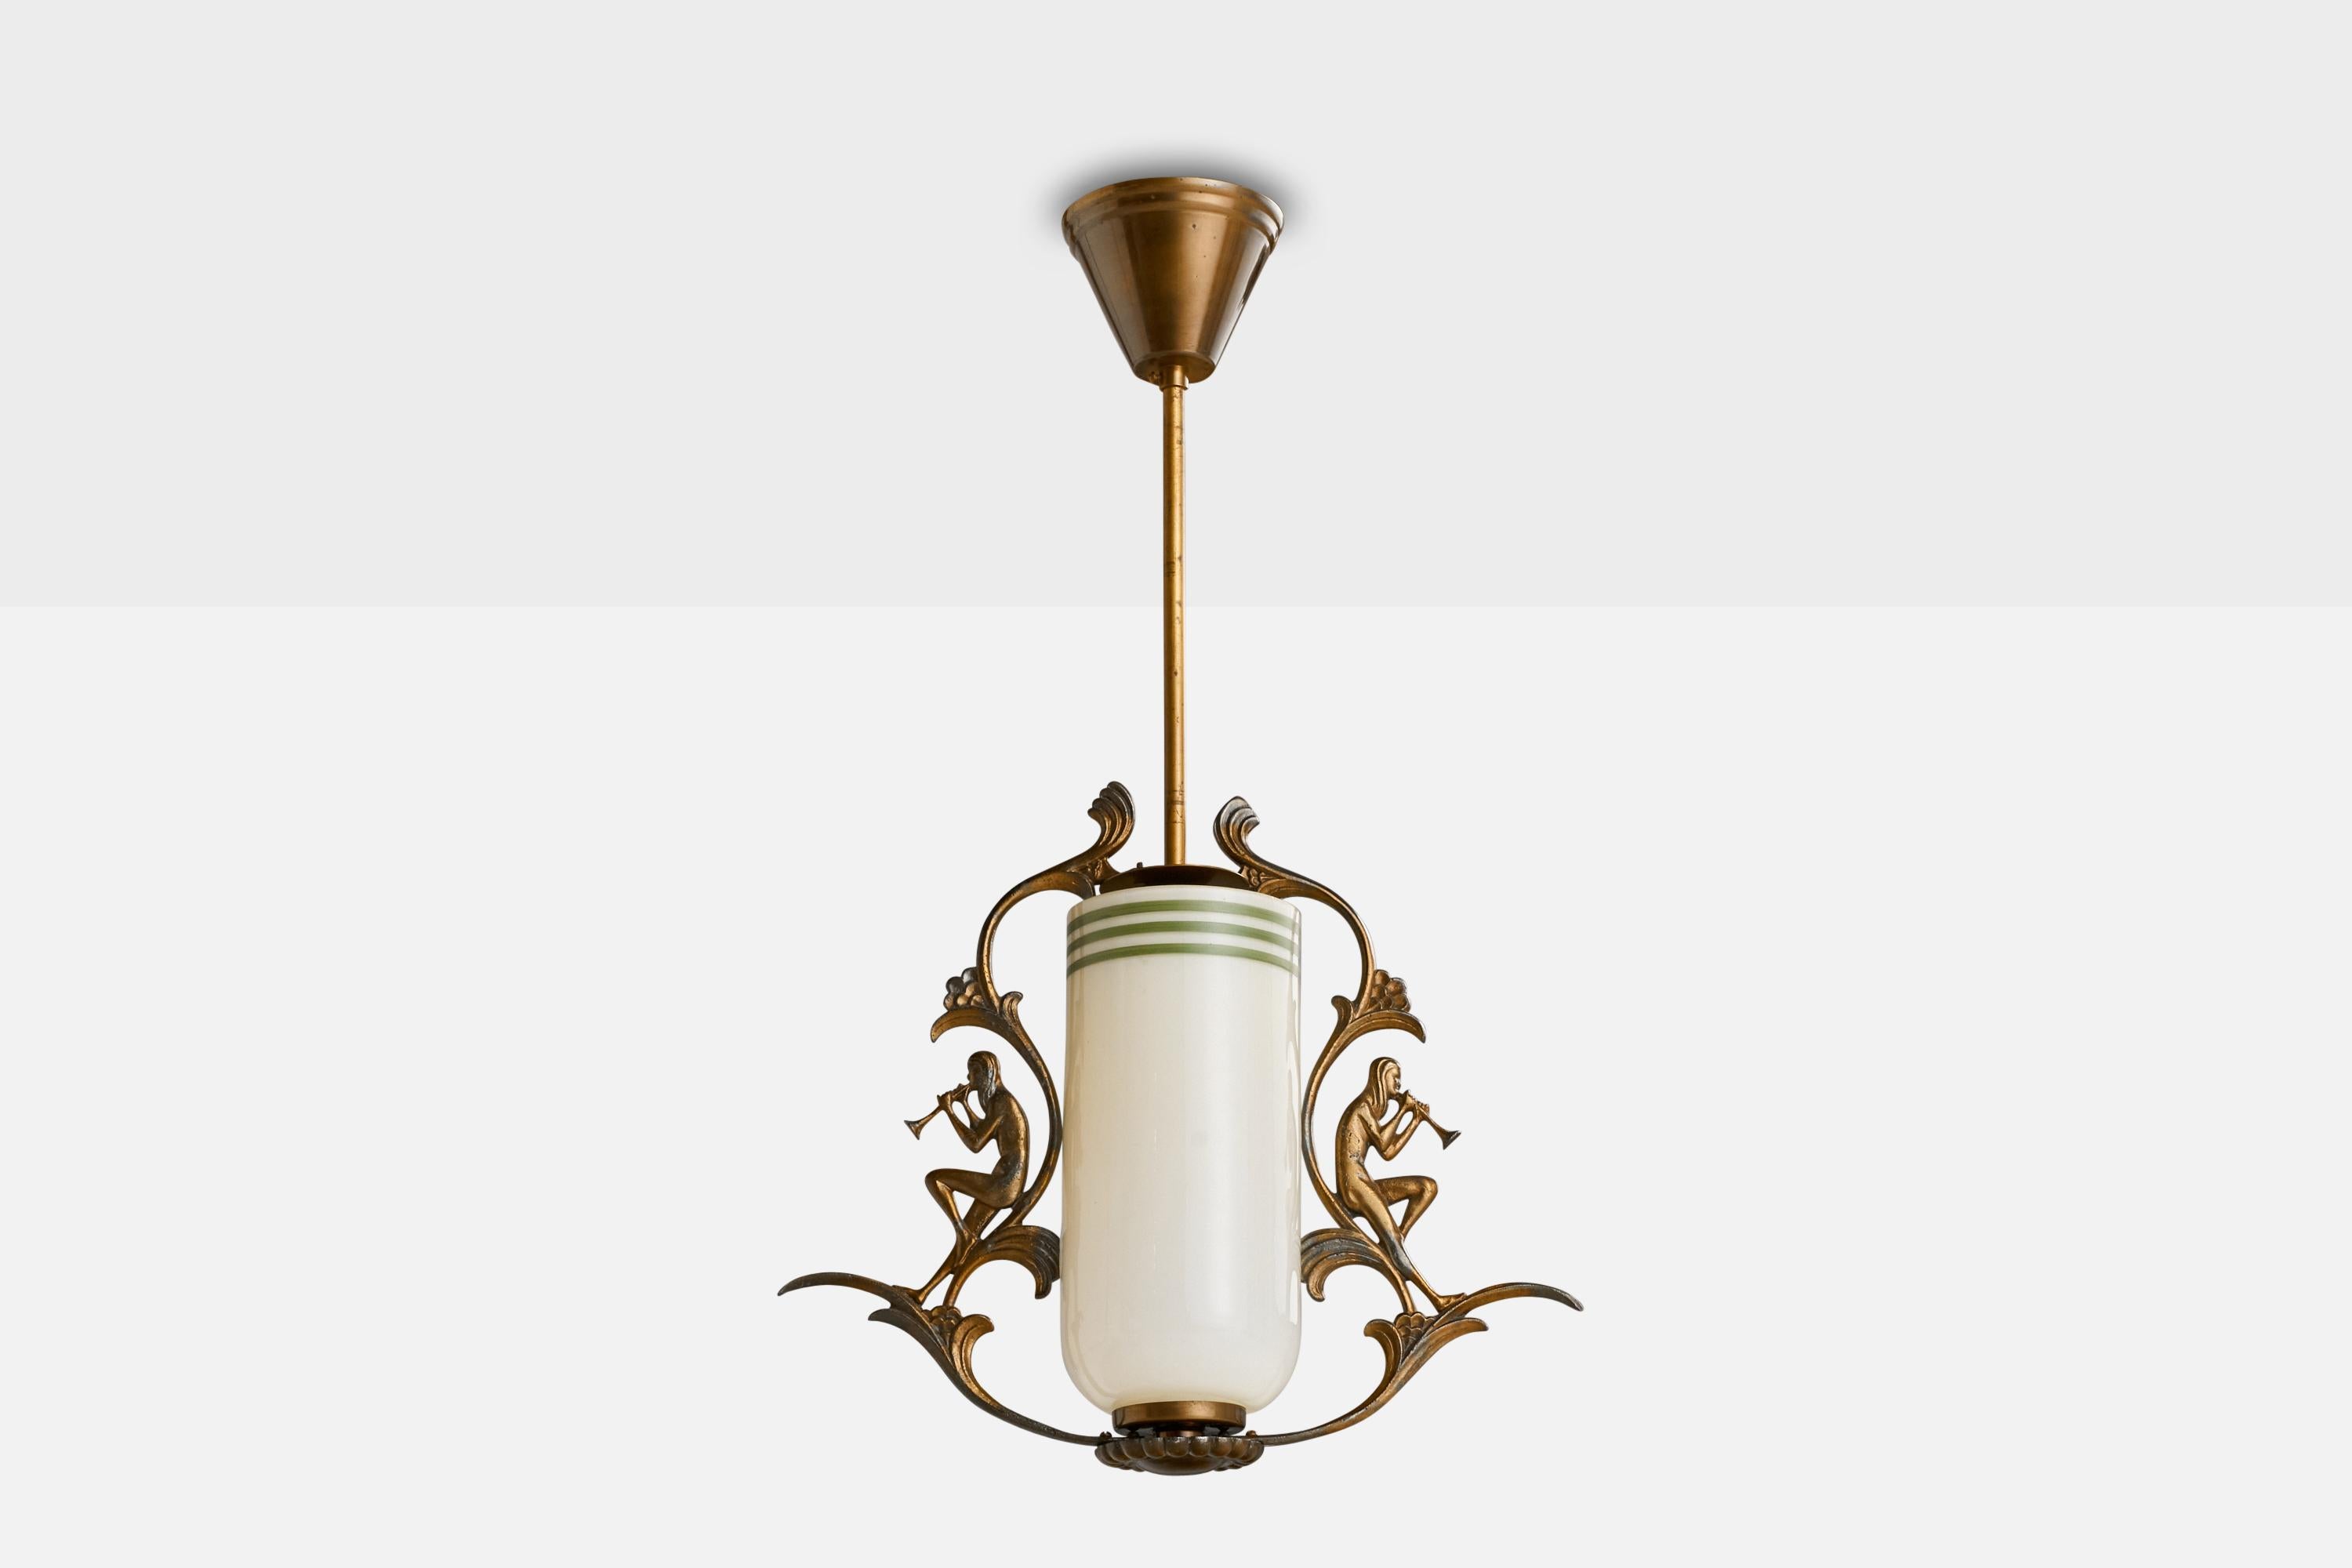 A copper and green-painted opaline glass pendant light designed and produced in Sweden, 1930s.

Dimensions of canopy (inches): 2.75”  H x 4” Diameter
Socket takes standard E-26 bulbs. 1 socket.There is no maximum wattage stated on the fixture. All